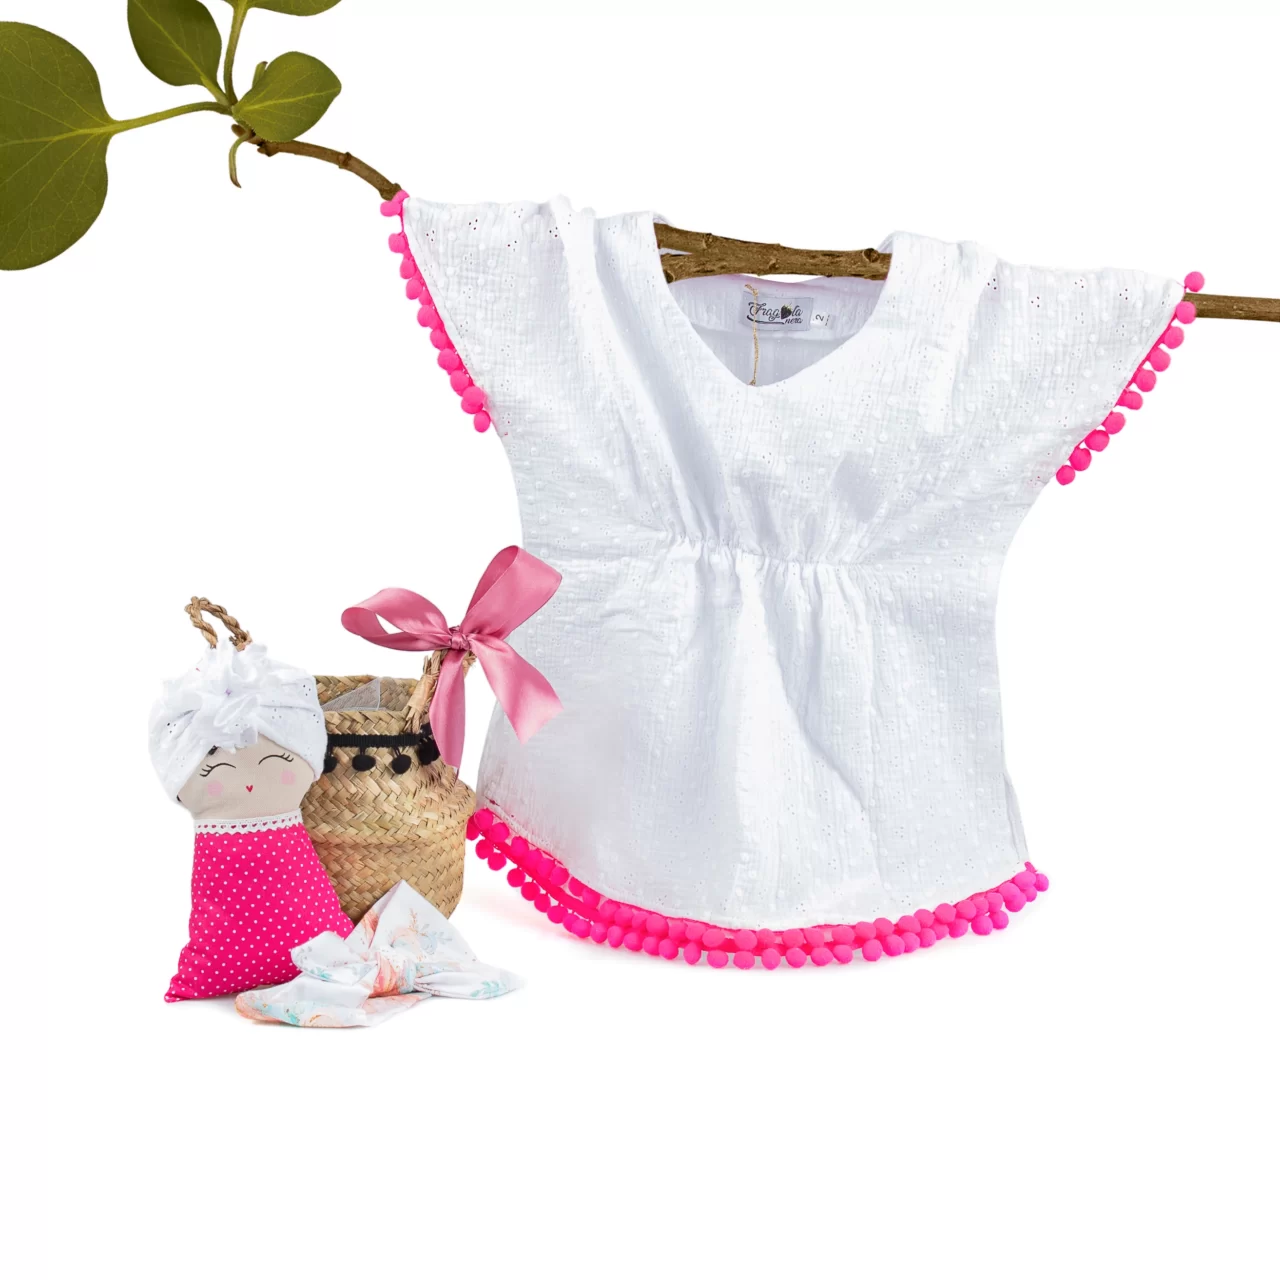 a white baby shirt with pink details on the seams that hangs from a tree branch and beside it it has a cloth doll and a small rope basket with a pink bow